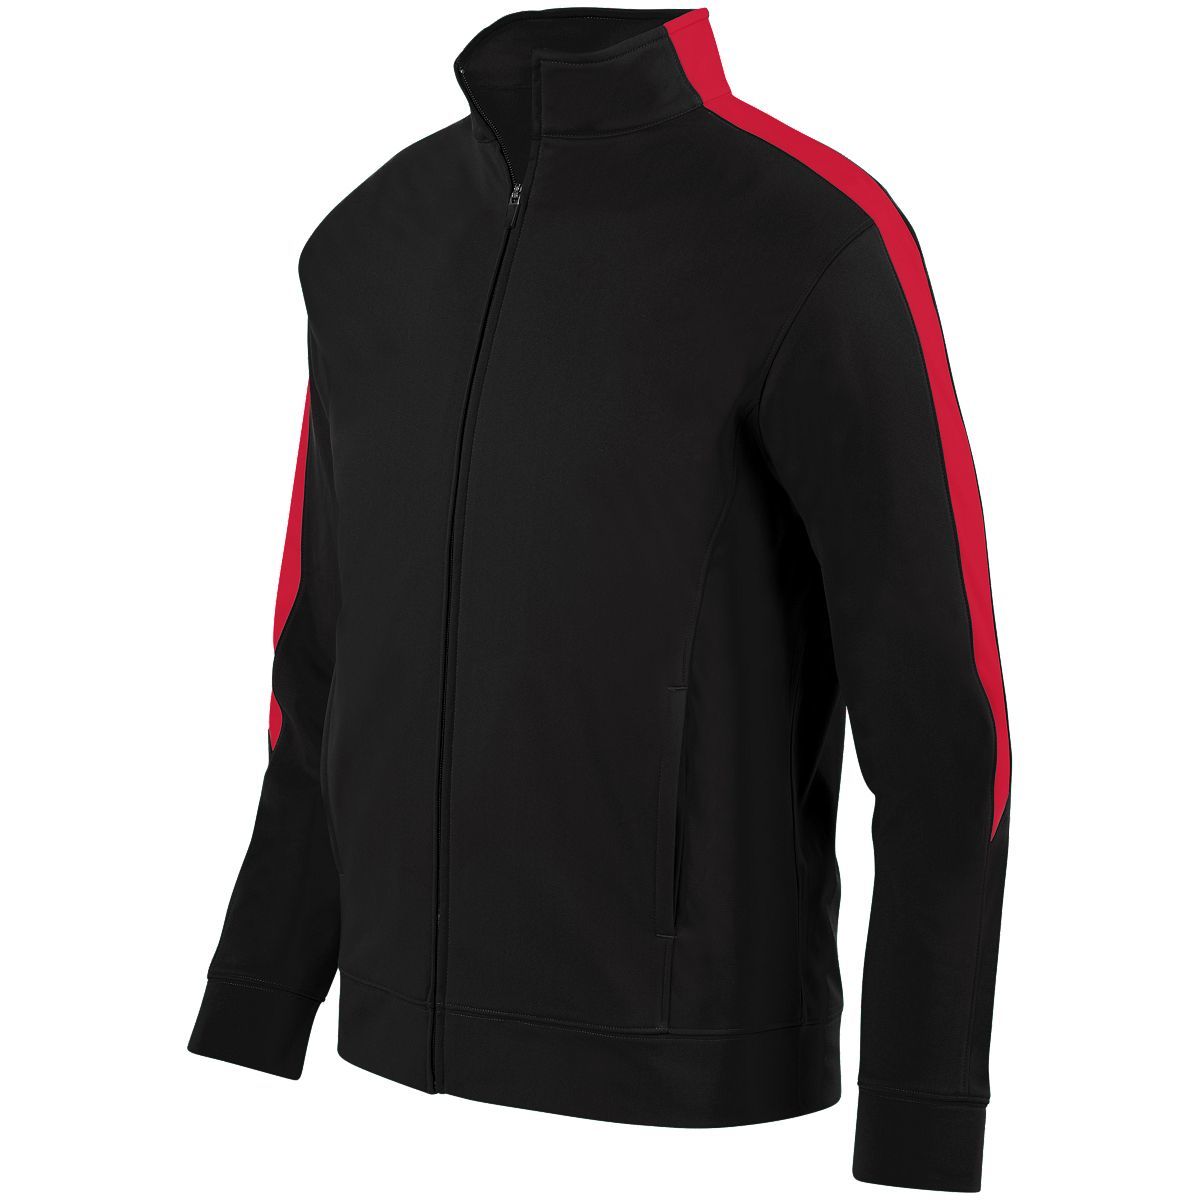 Augusta Sportswear Medalist Jacket 2.0 in Black/Red  -Part of the Adult, Adult-Jacket, Augusta-Products, Outerwear product lines at KanaleyCreations.com